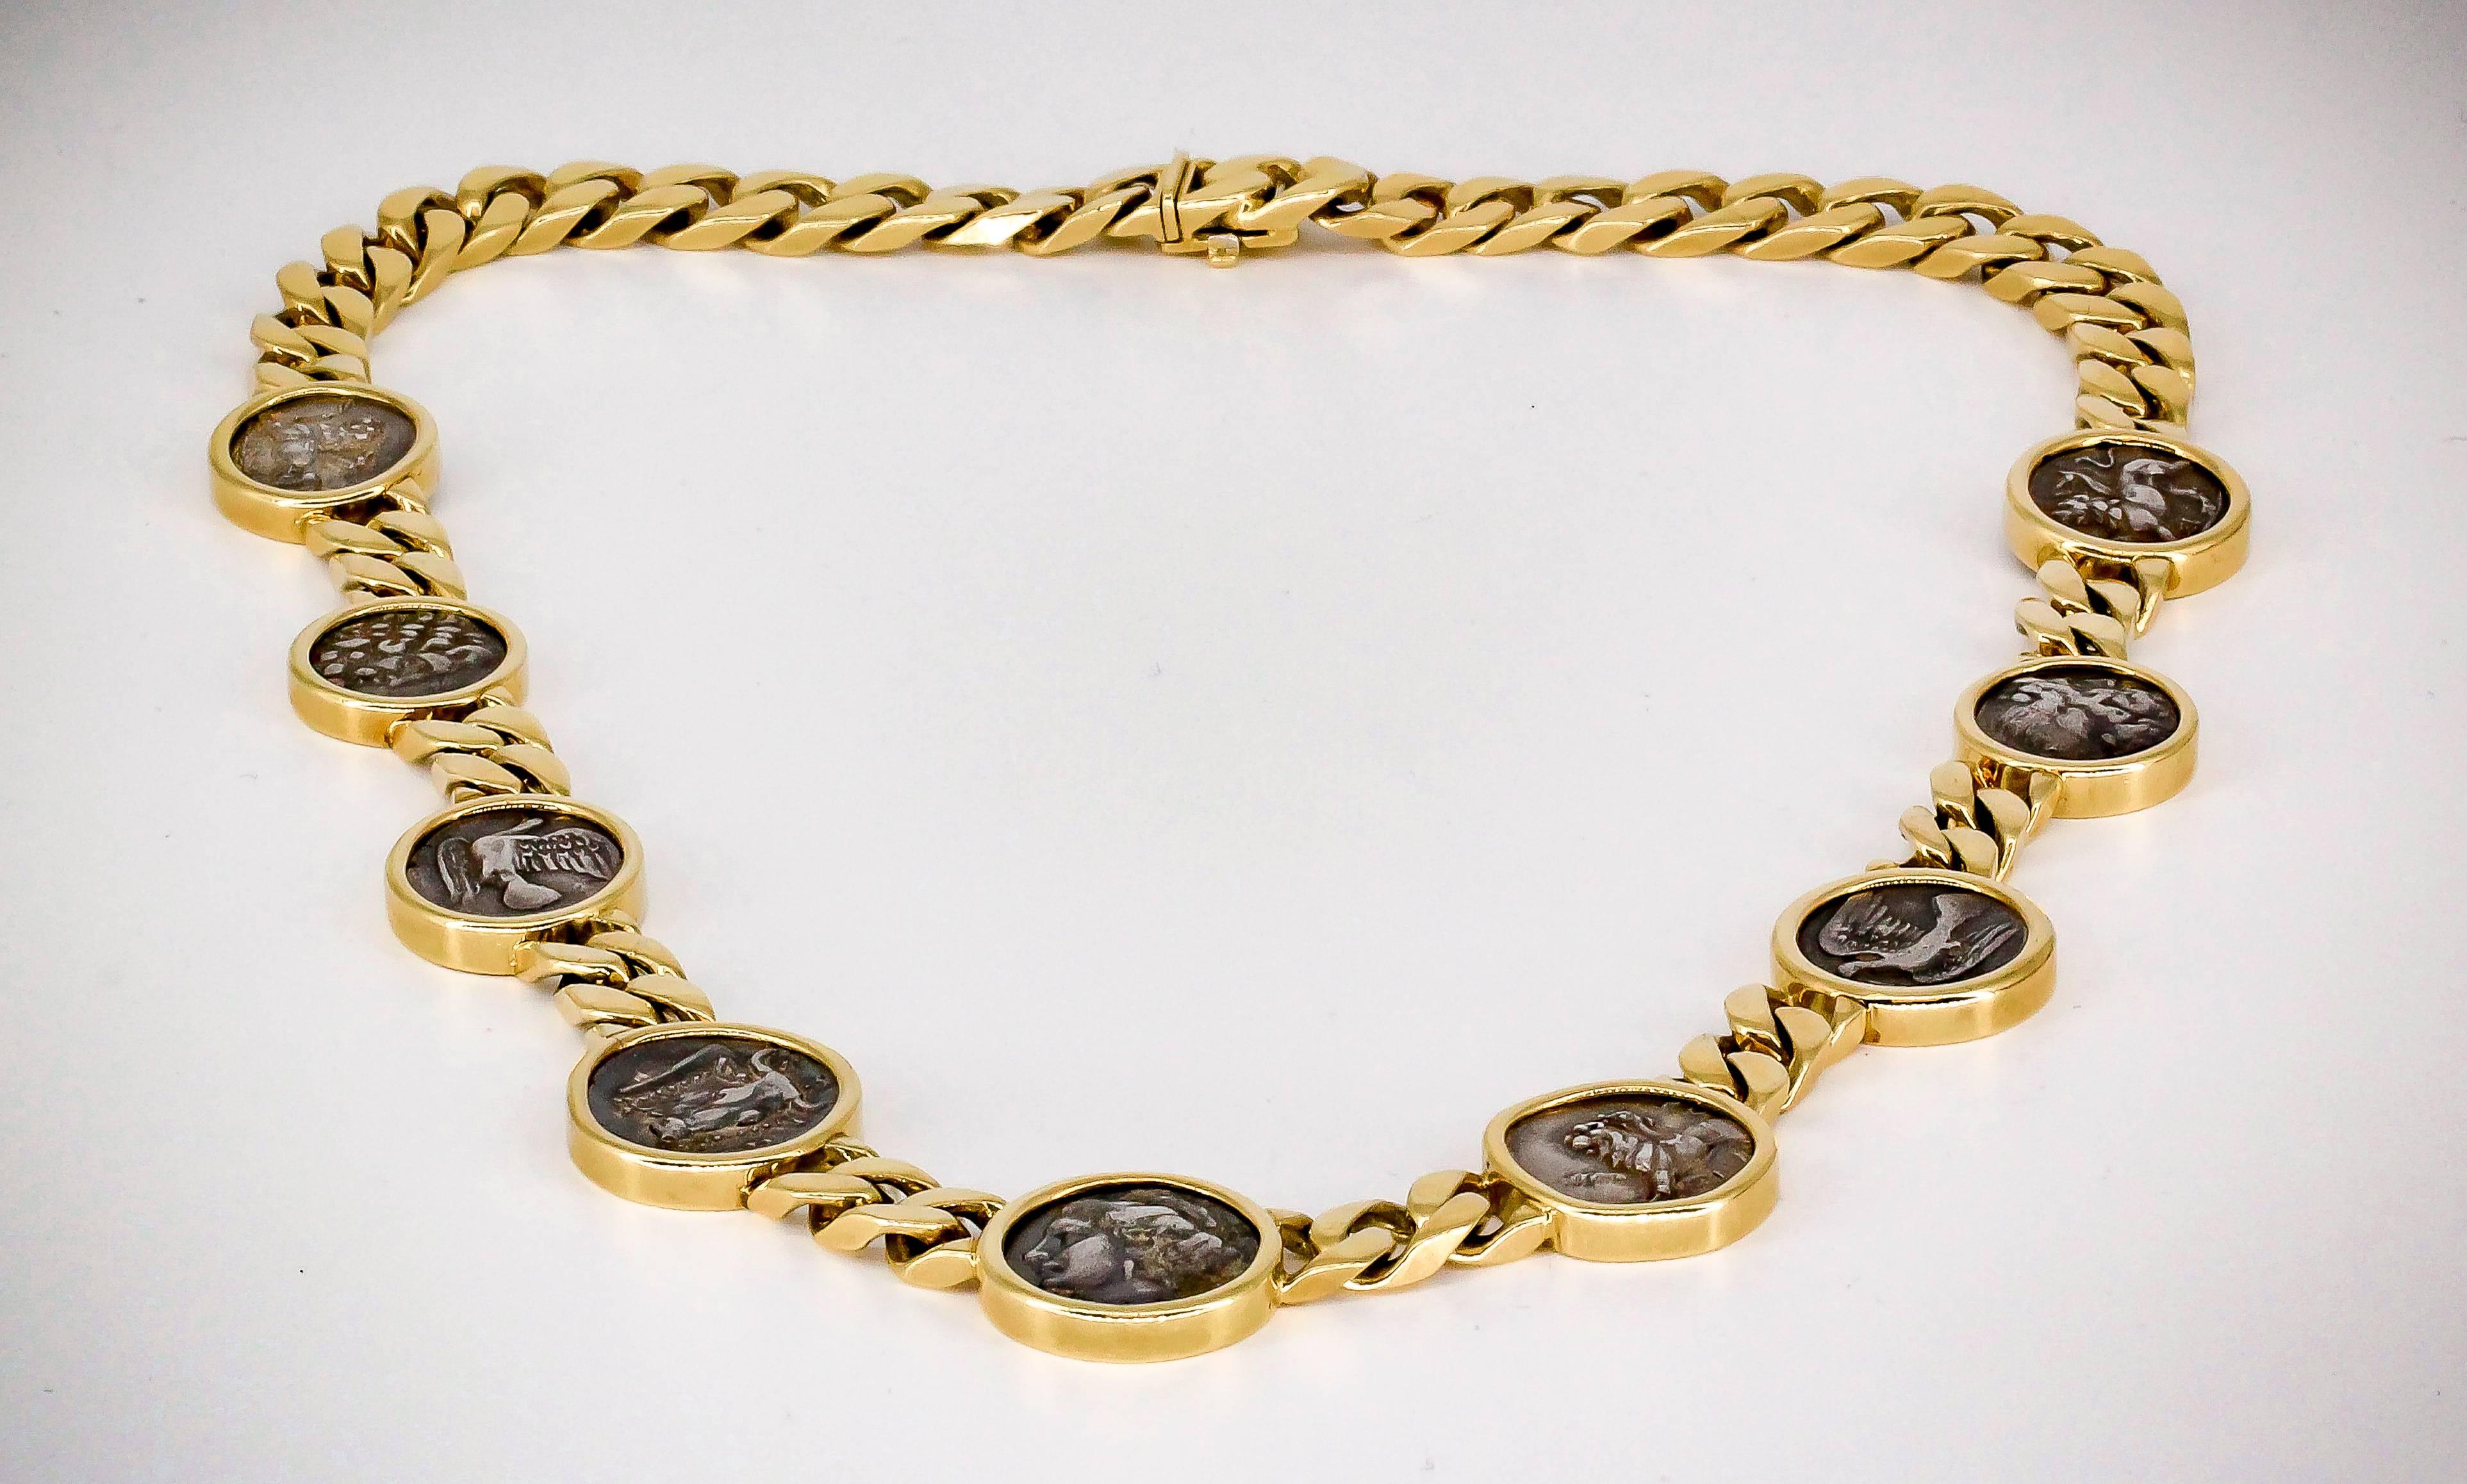 Interesting ancient Greek coin and 18K yellow gold necklace. It features 9 coins in great  shape, further accented by solid 18K gold necklace, resembling Bulgari pieces of similar style.  Coins consist of mostly SIKYONIA, Sikyon. Circa 4th Century